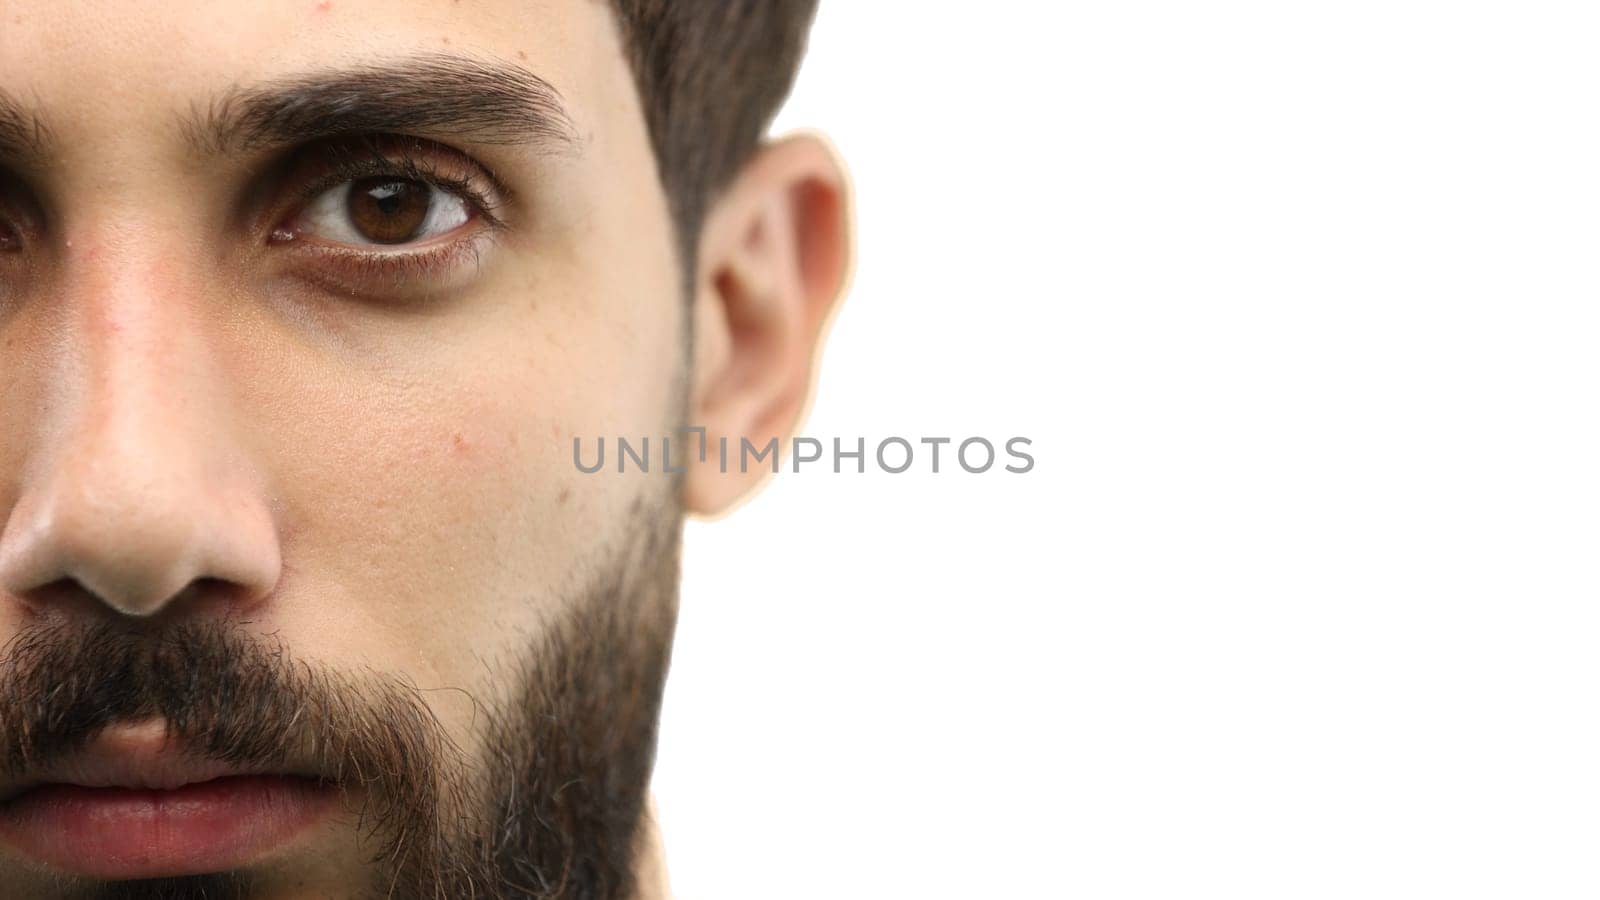 Man's face, close-up, on a white background.